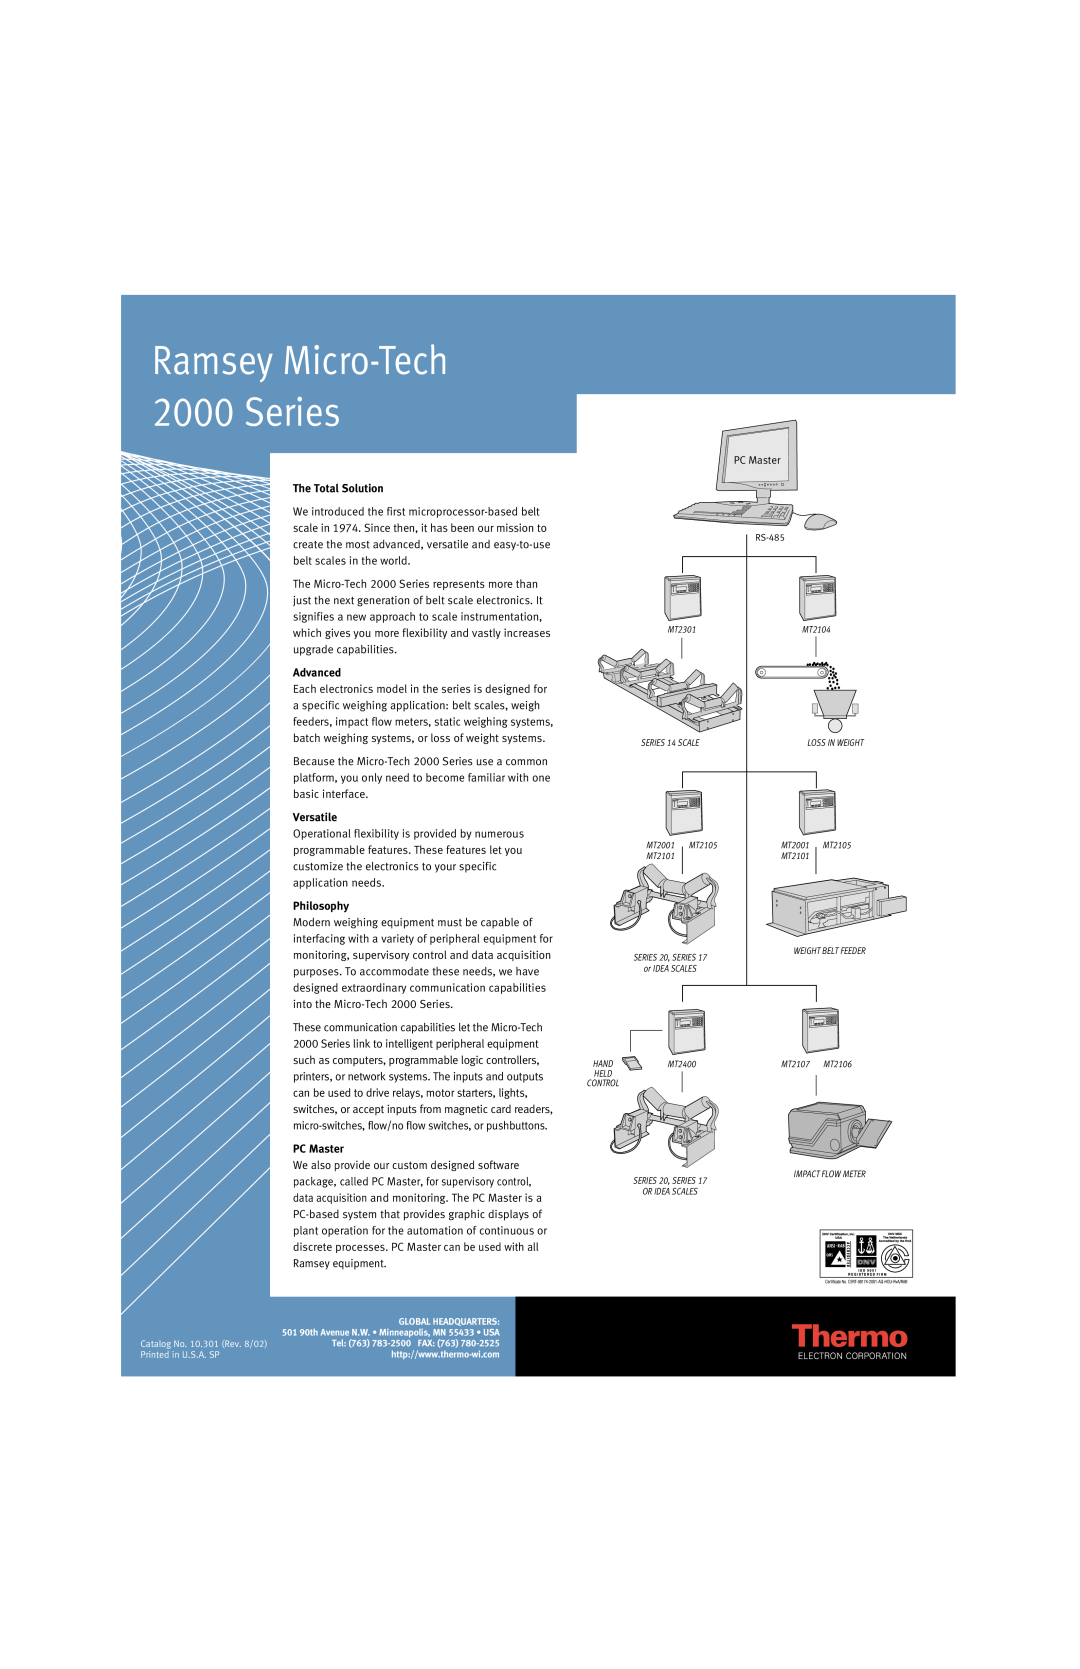 Thermo Products 20 Series Ramsey Micro-Tech 2000 Series, The Total Solution, Advanced, Versatile, Philosophy, PC Master 